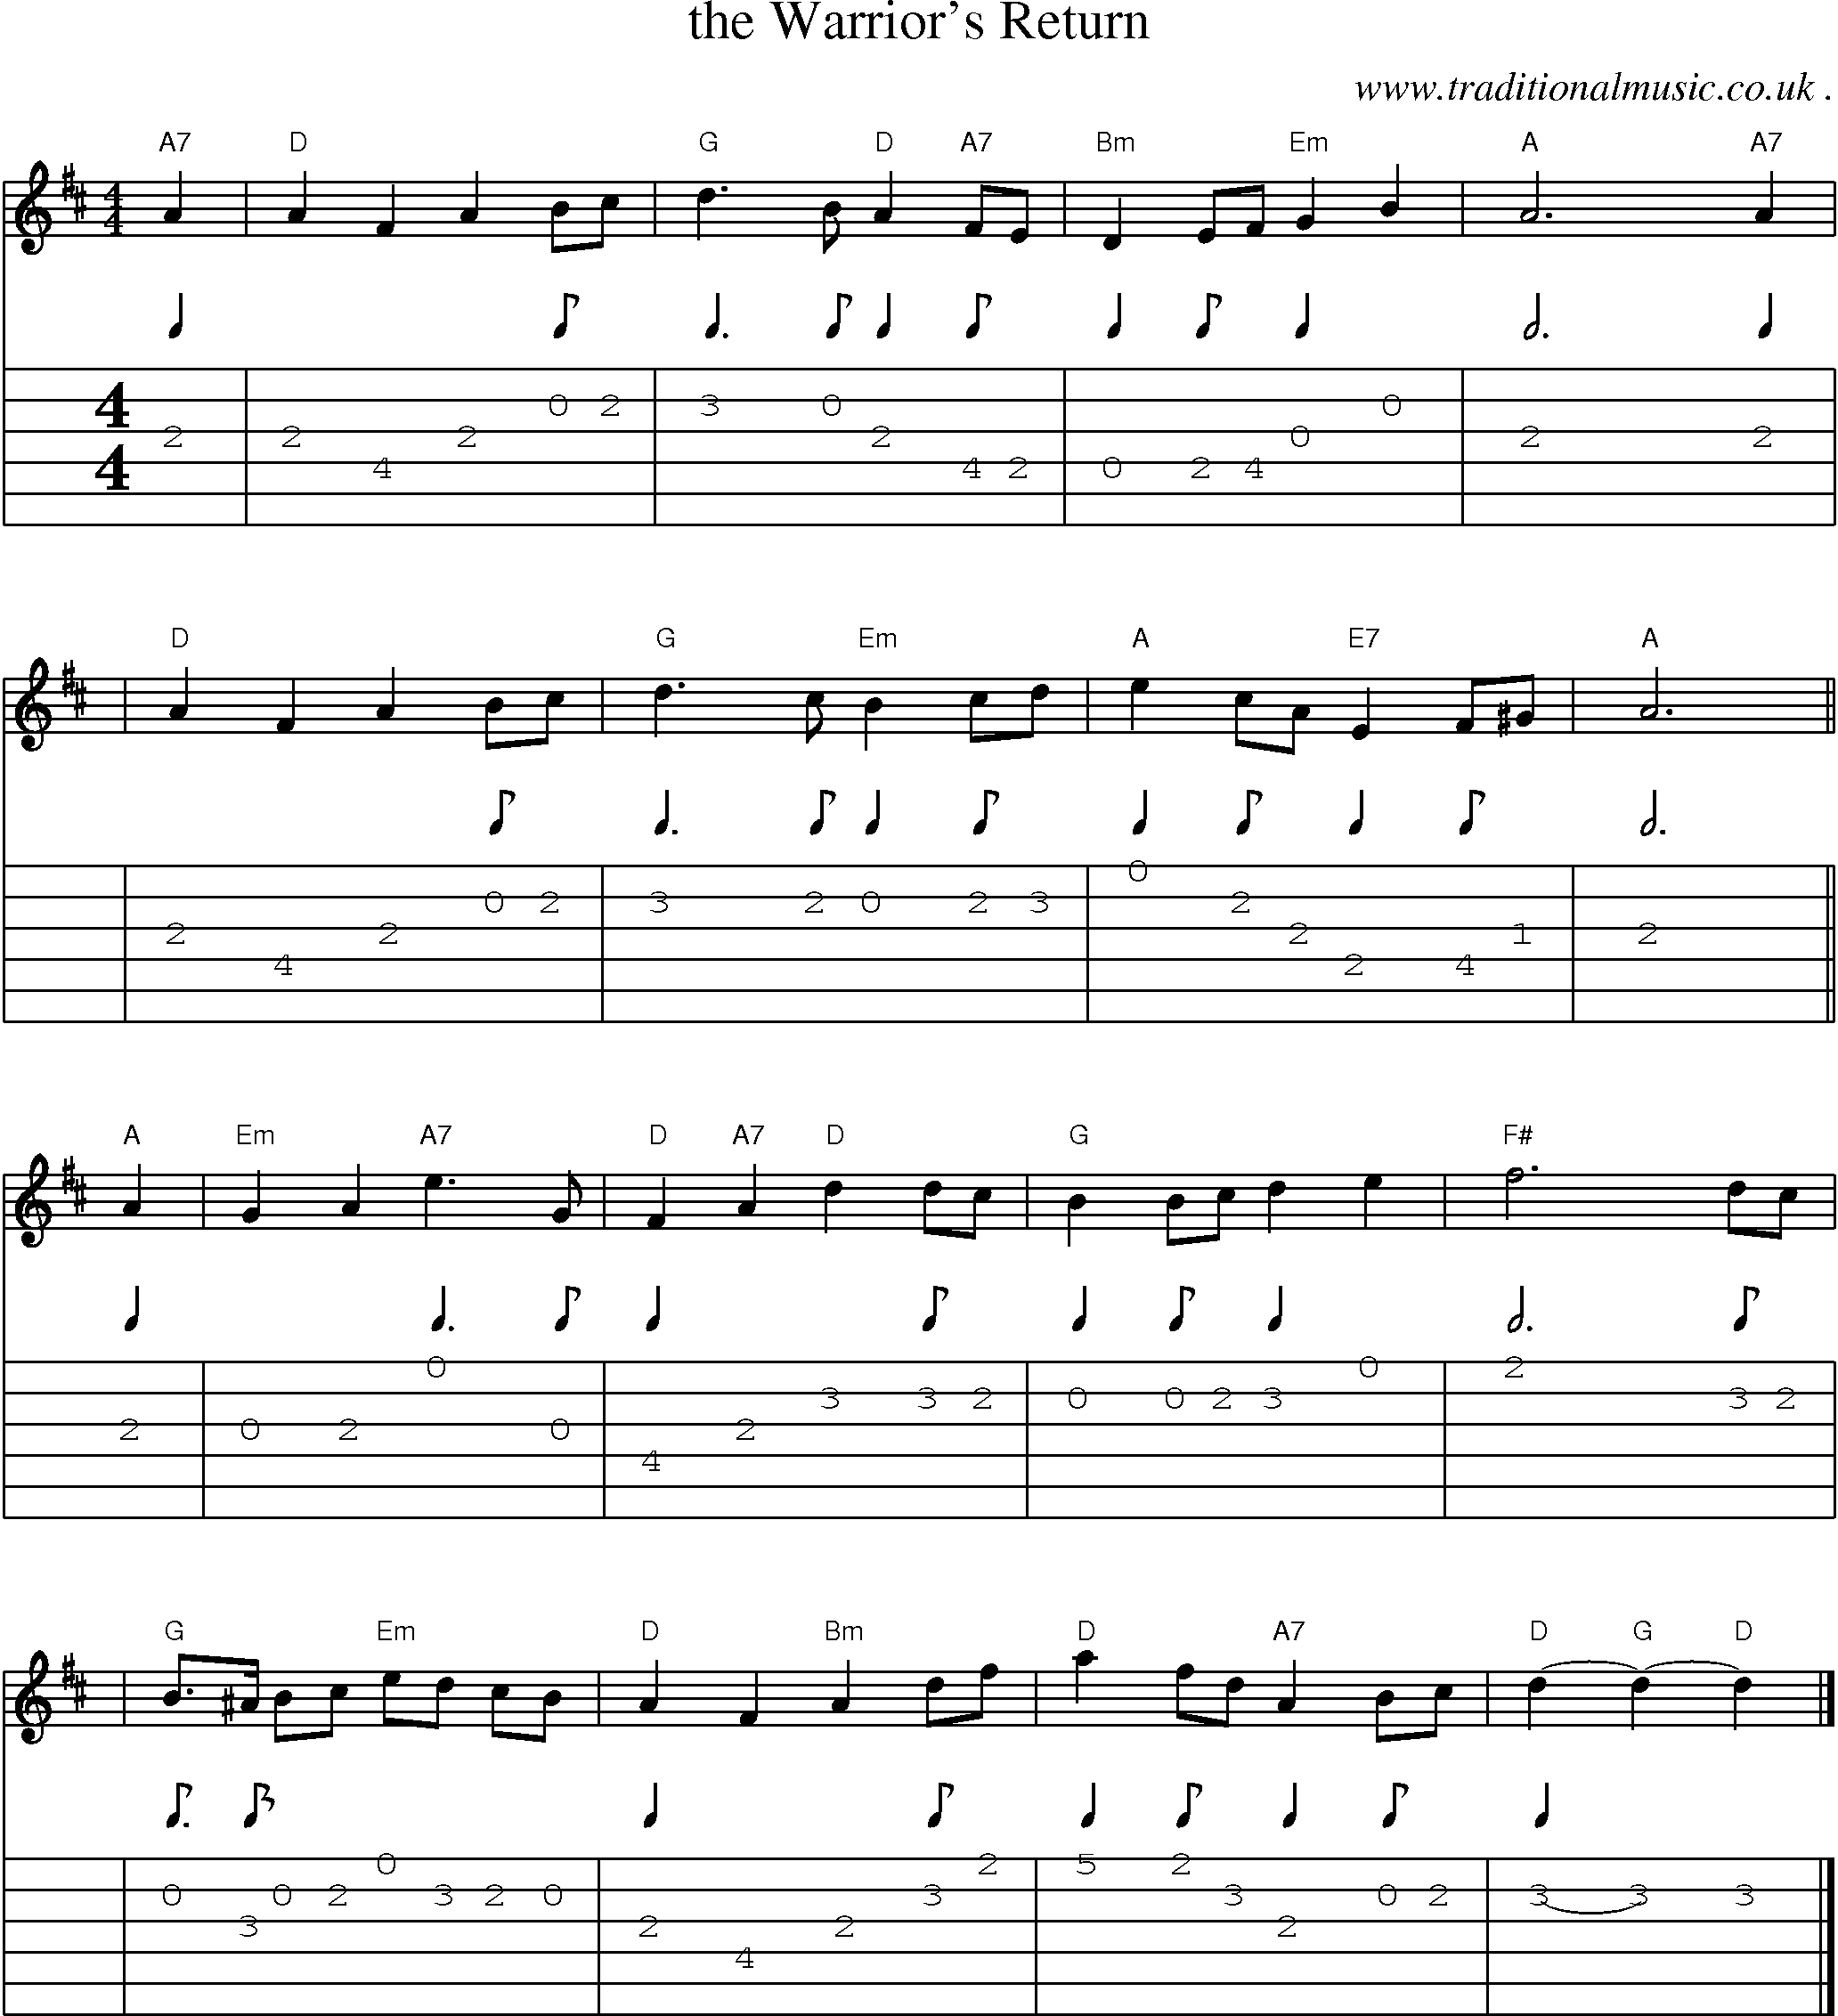 Sheet-music  score, Chords and Guitar Tabs for The Warriors Return